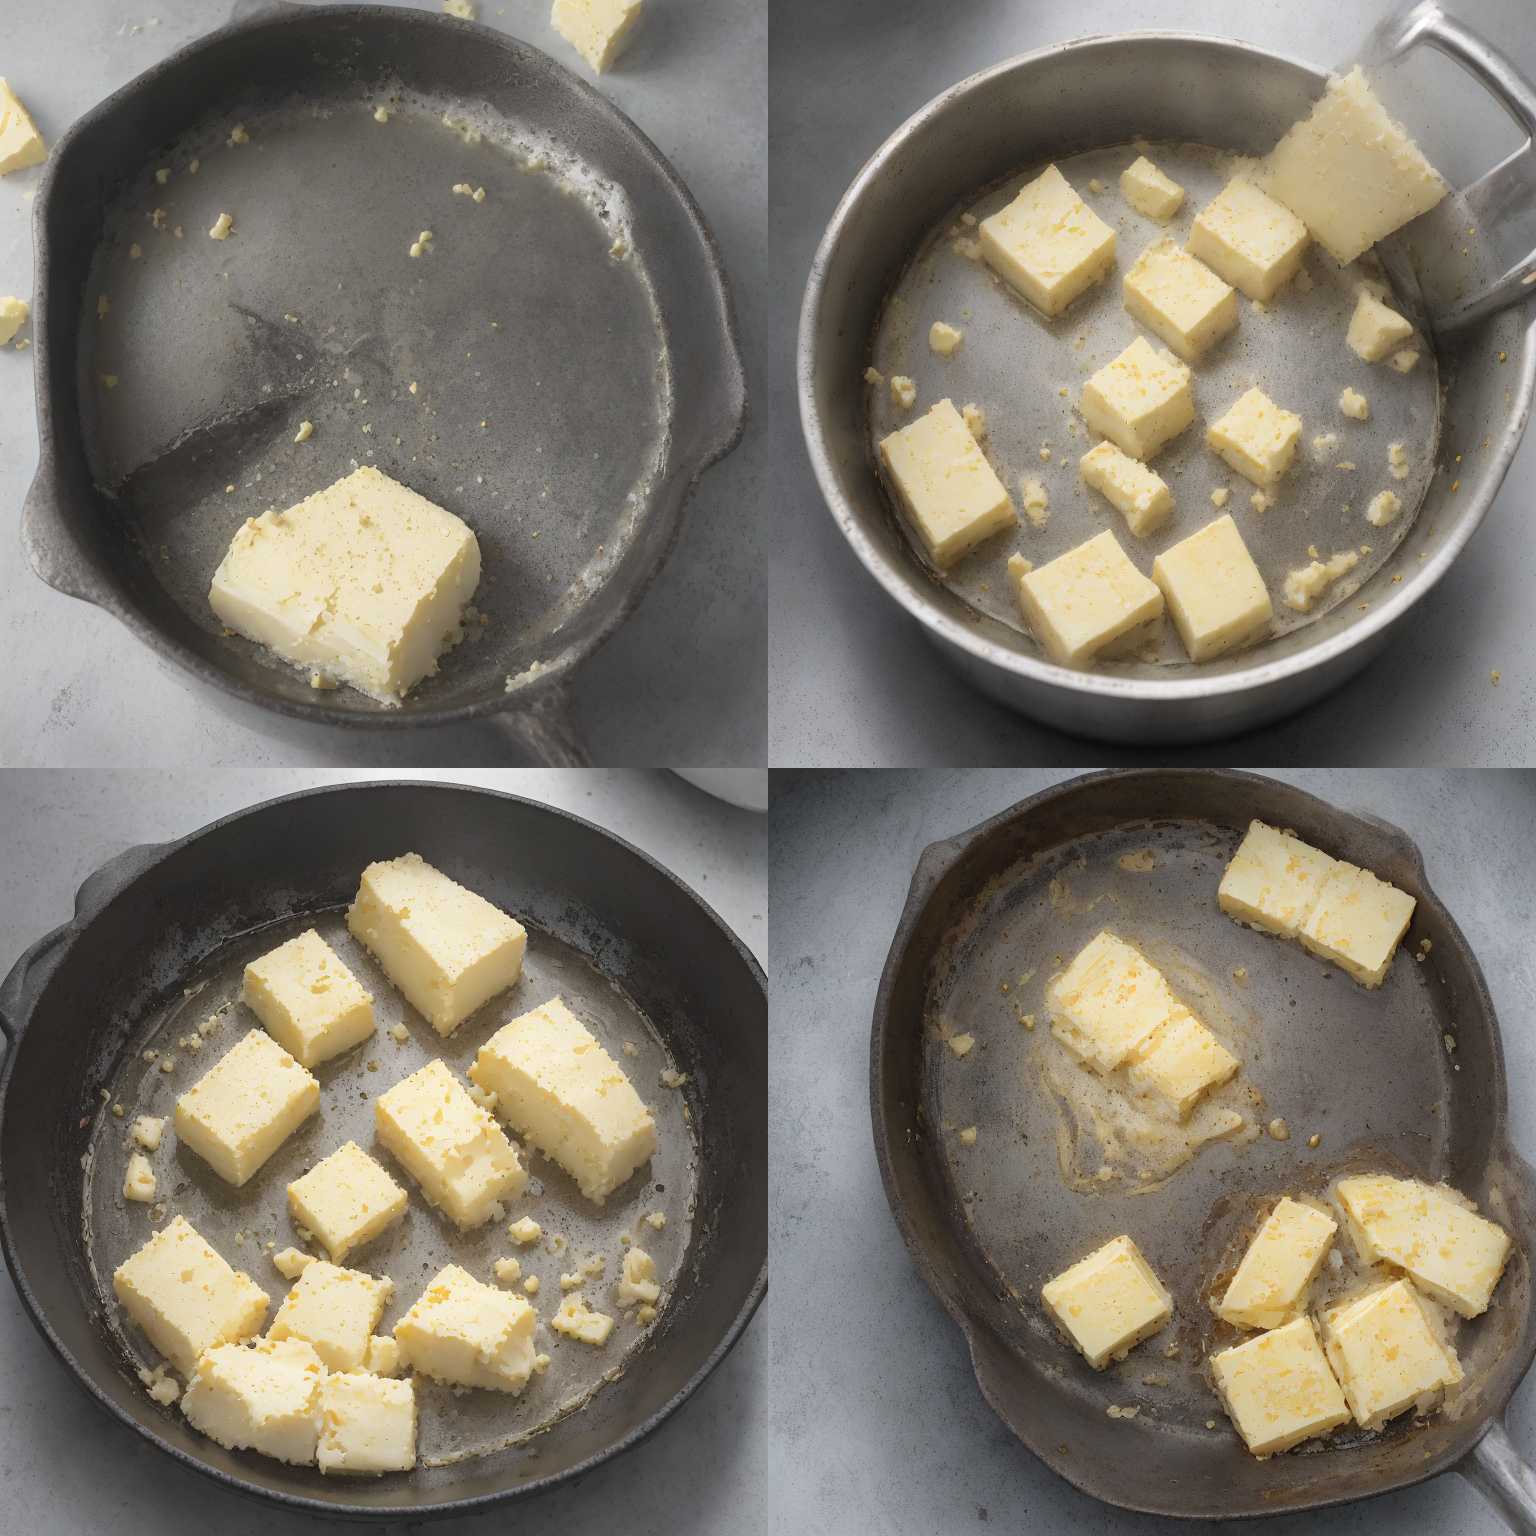 A piece of butter in a heated pan